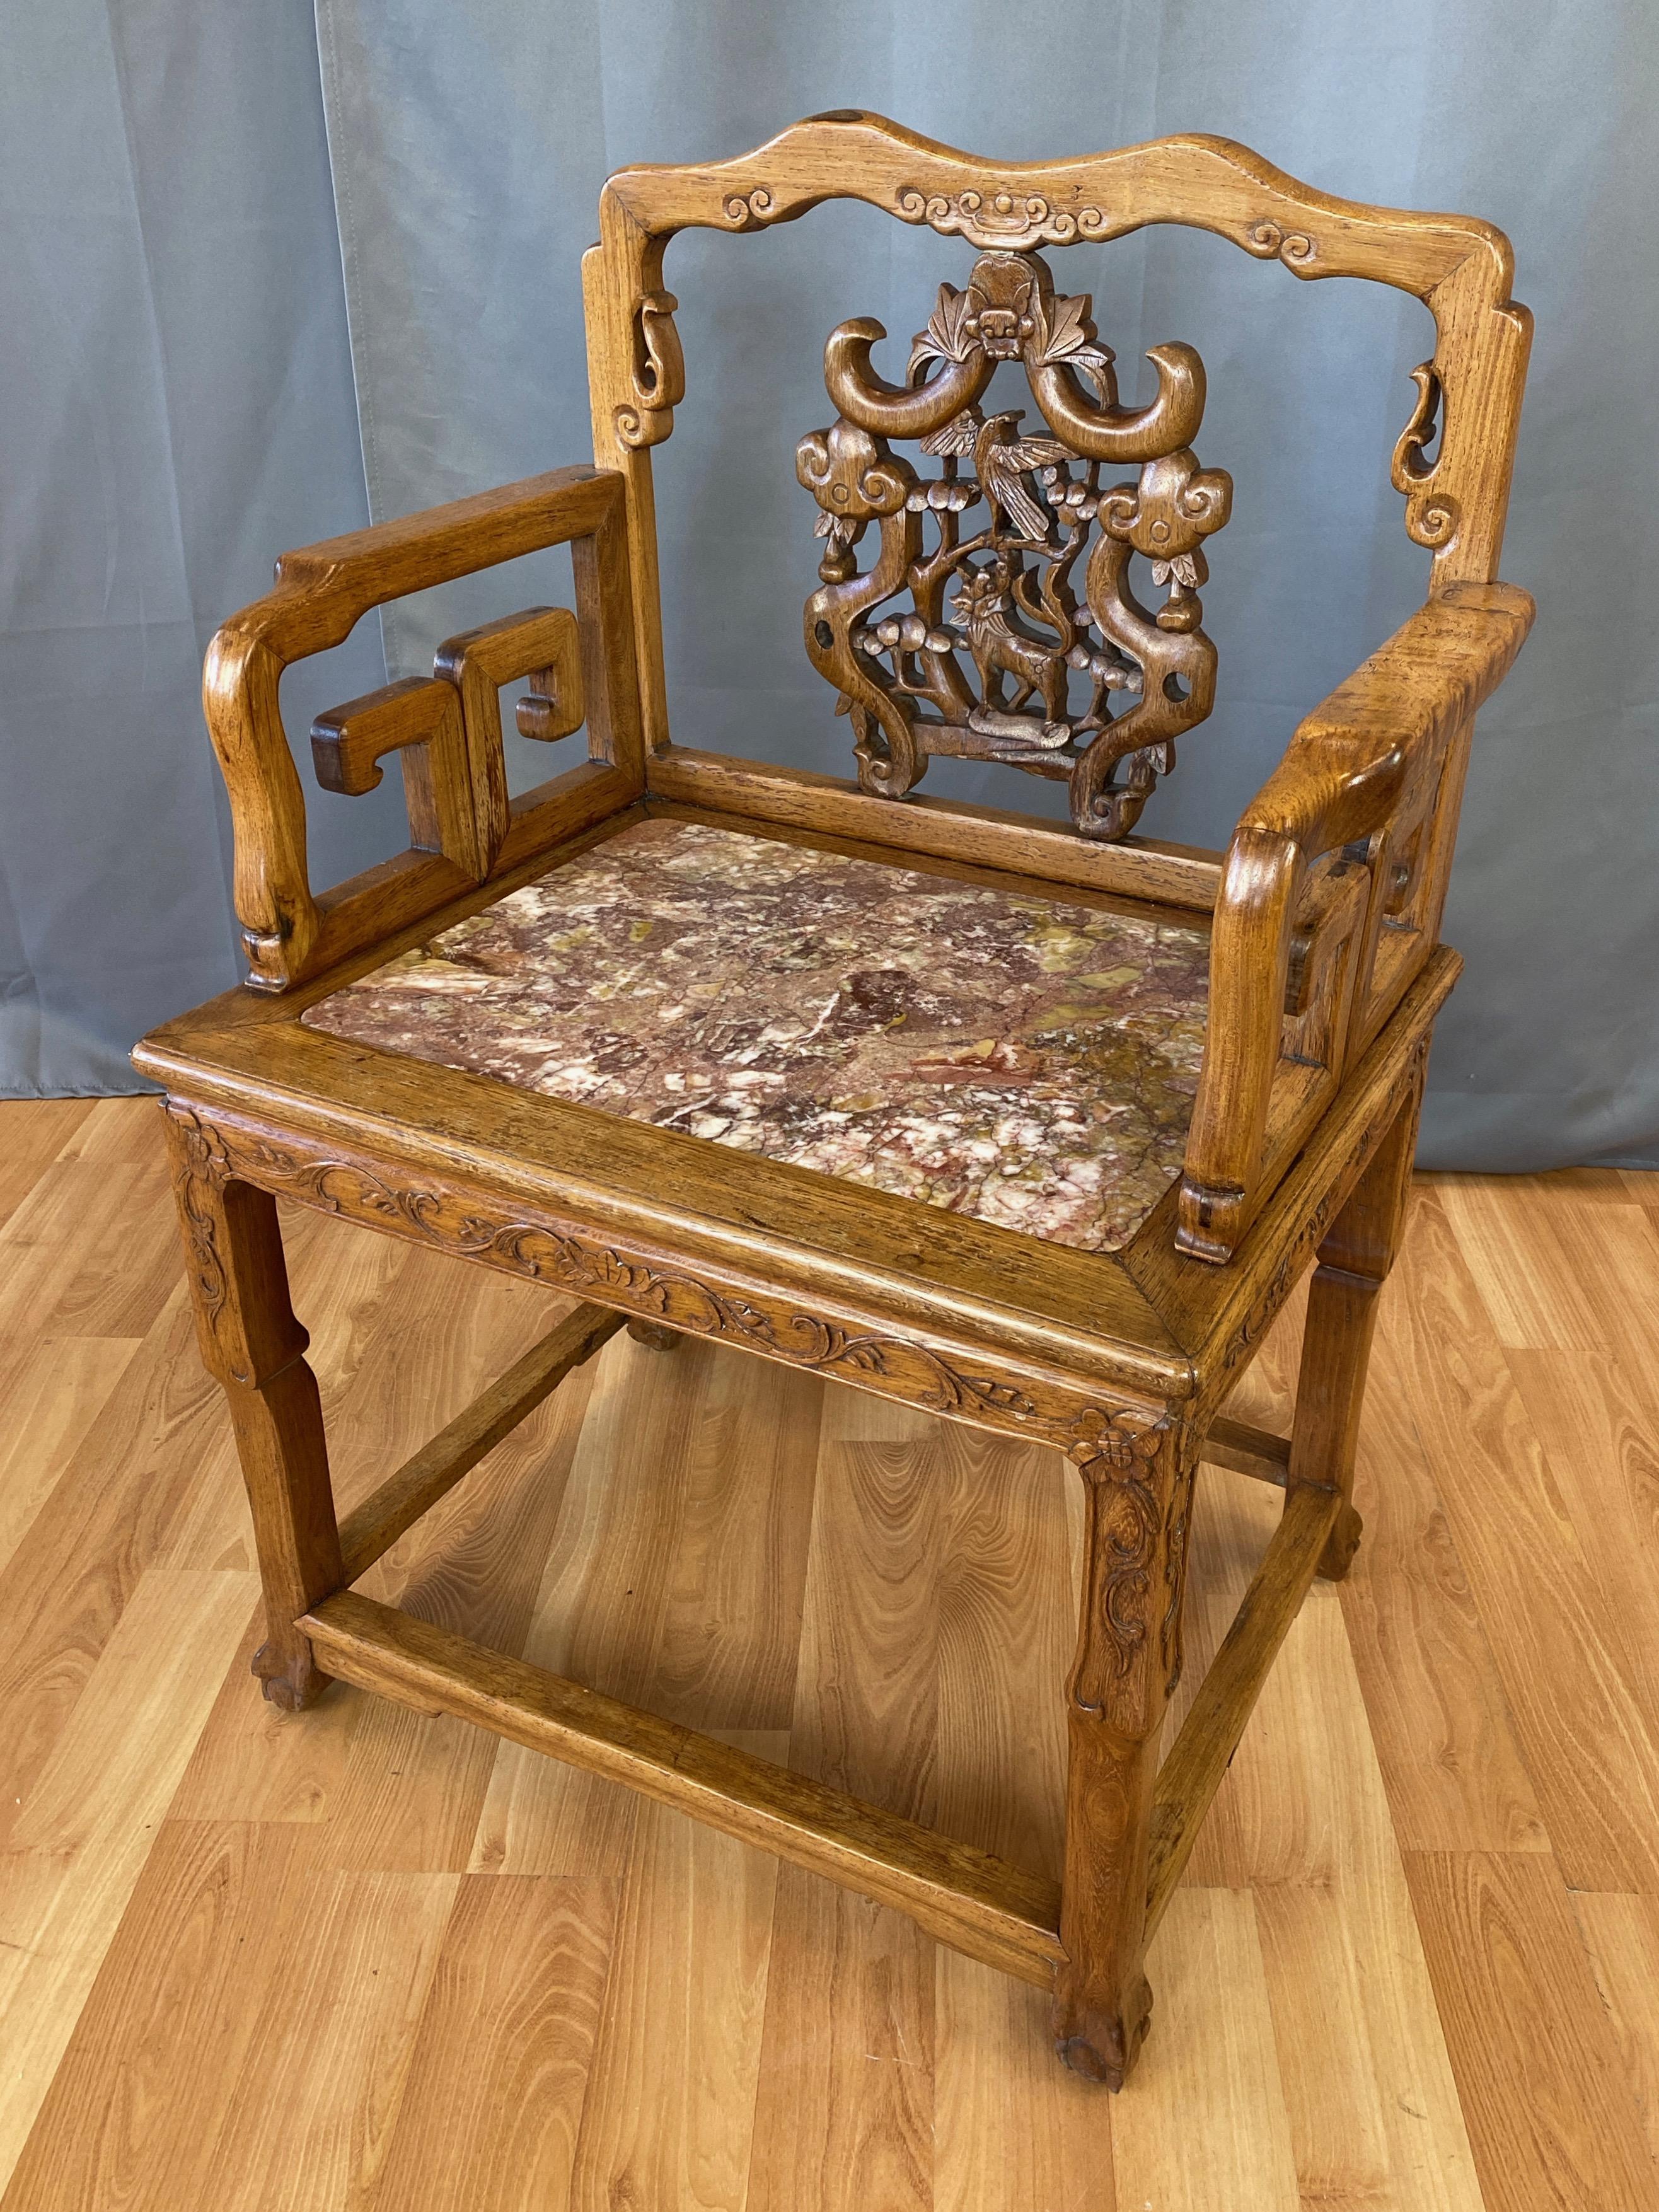 A very fine 19th century Chinese Qing dynasty solid rosewood armchair or lounge chair with marble seat.

Distinguished by a hand-carved pierced back splat with lively flora & fauna motif that’s topped by a bat, the traditional symbol for longevity,